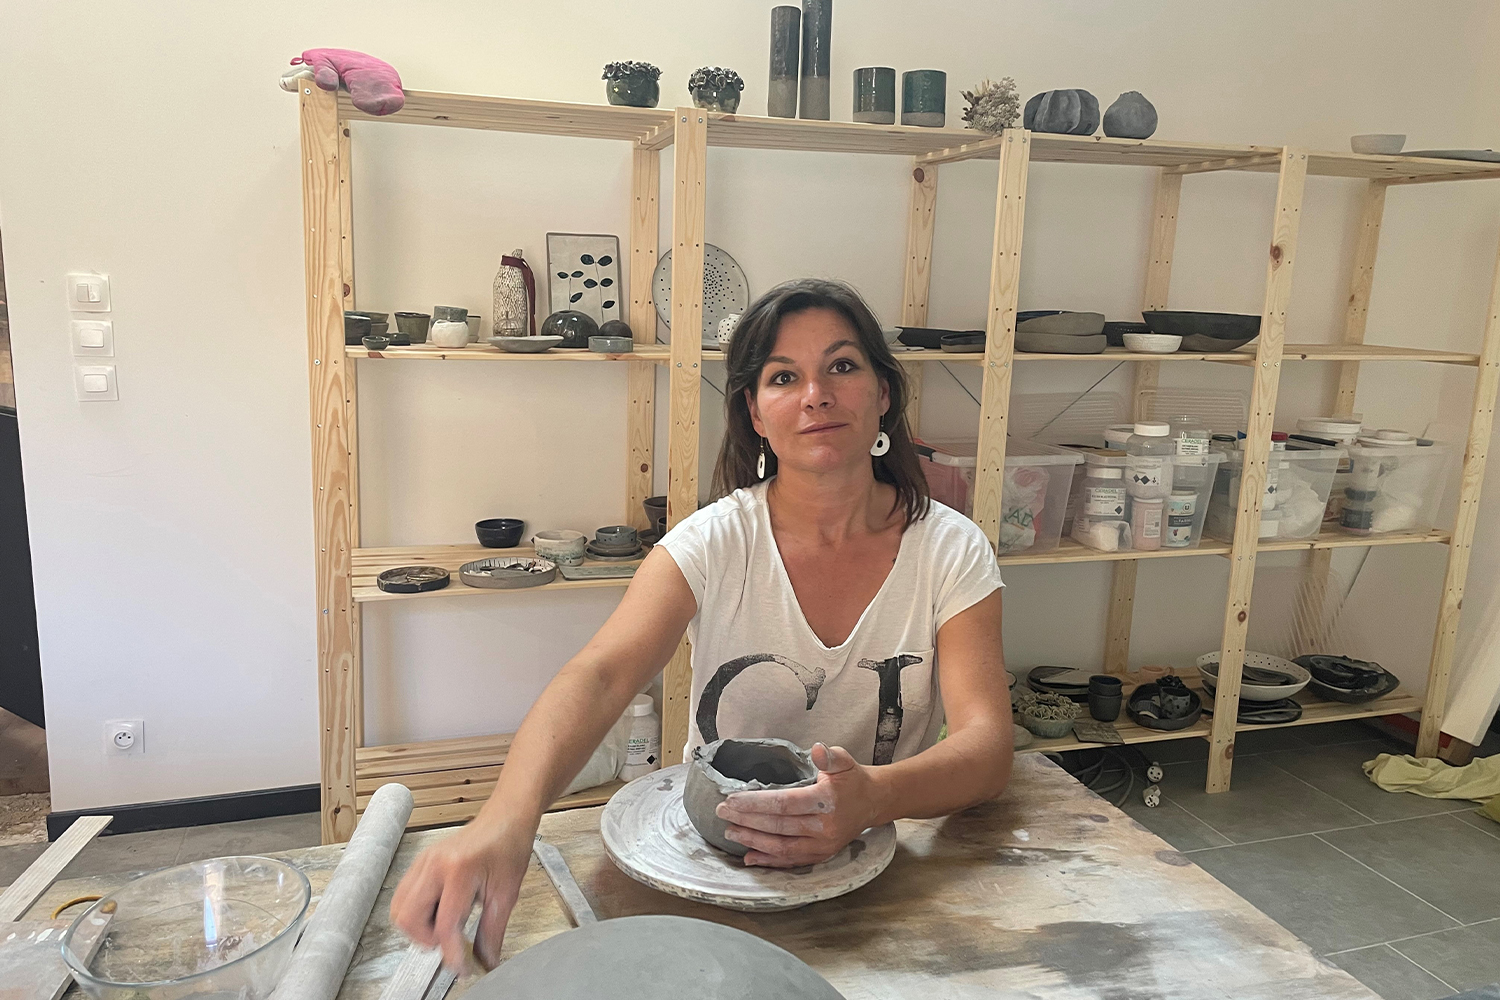 Behind the tissue: Luce Catté, Corporate Buyer